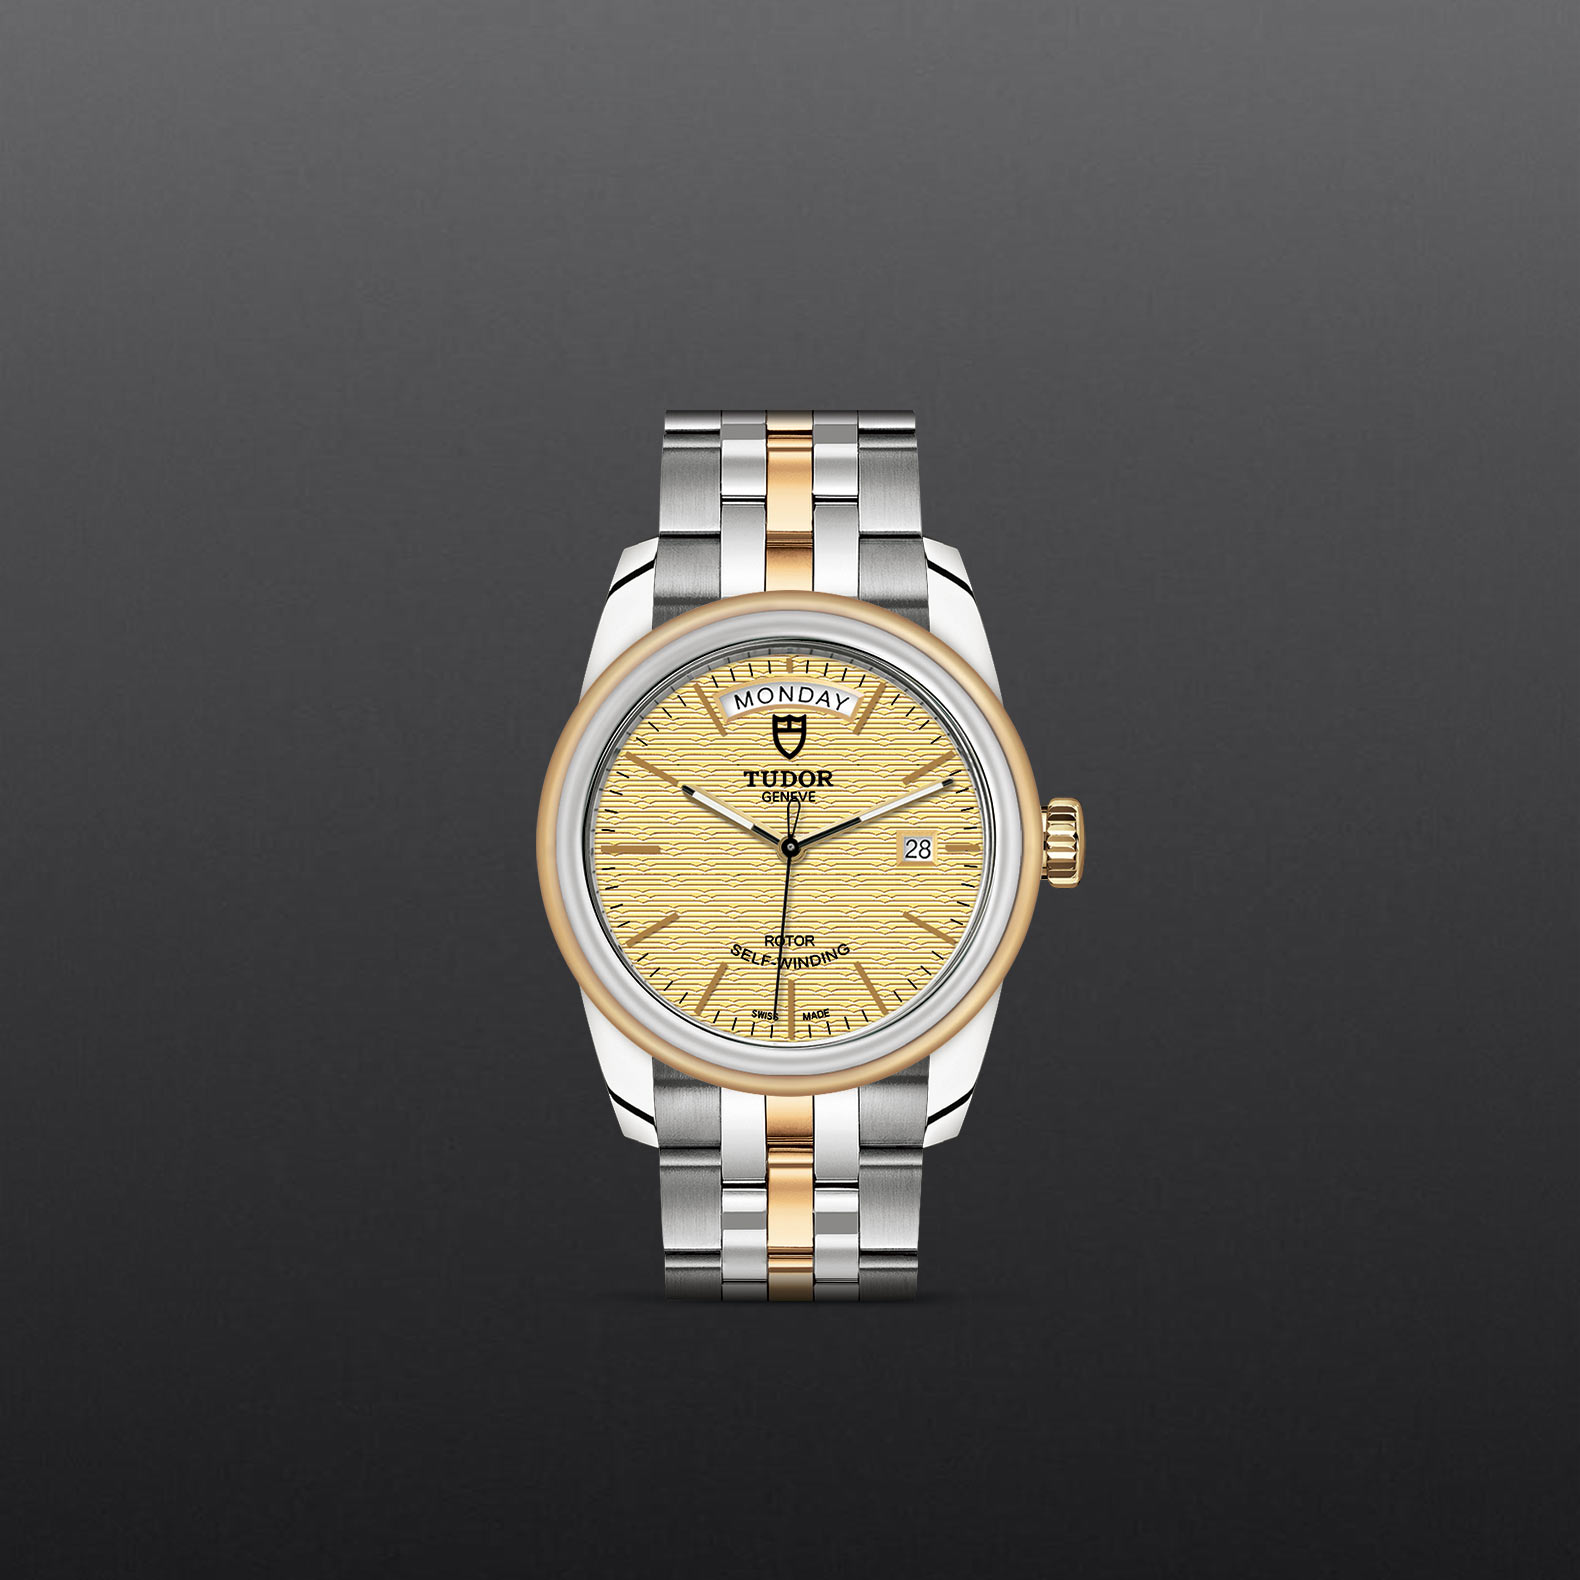 Tudor Glamour Date+Day M56003-0003